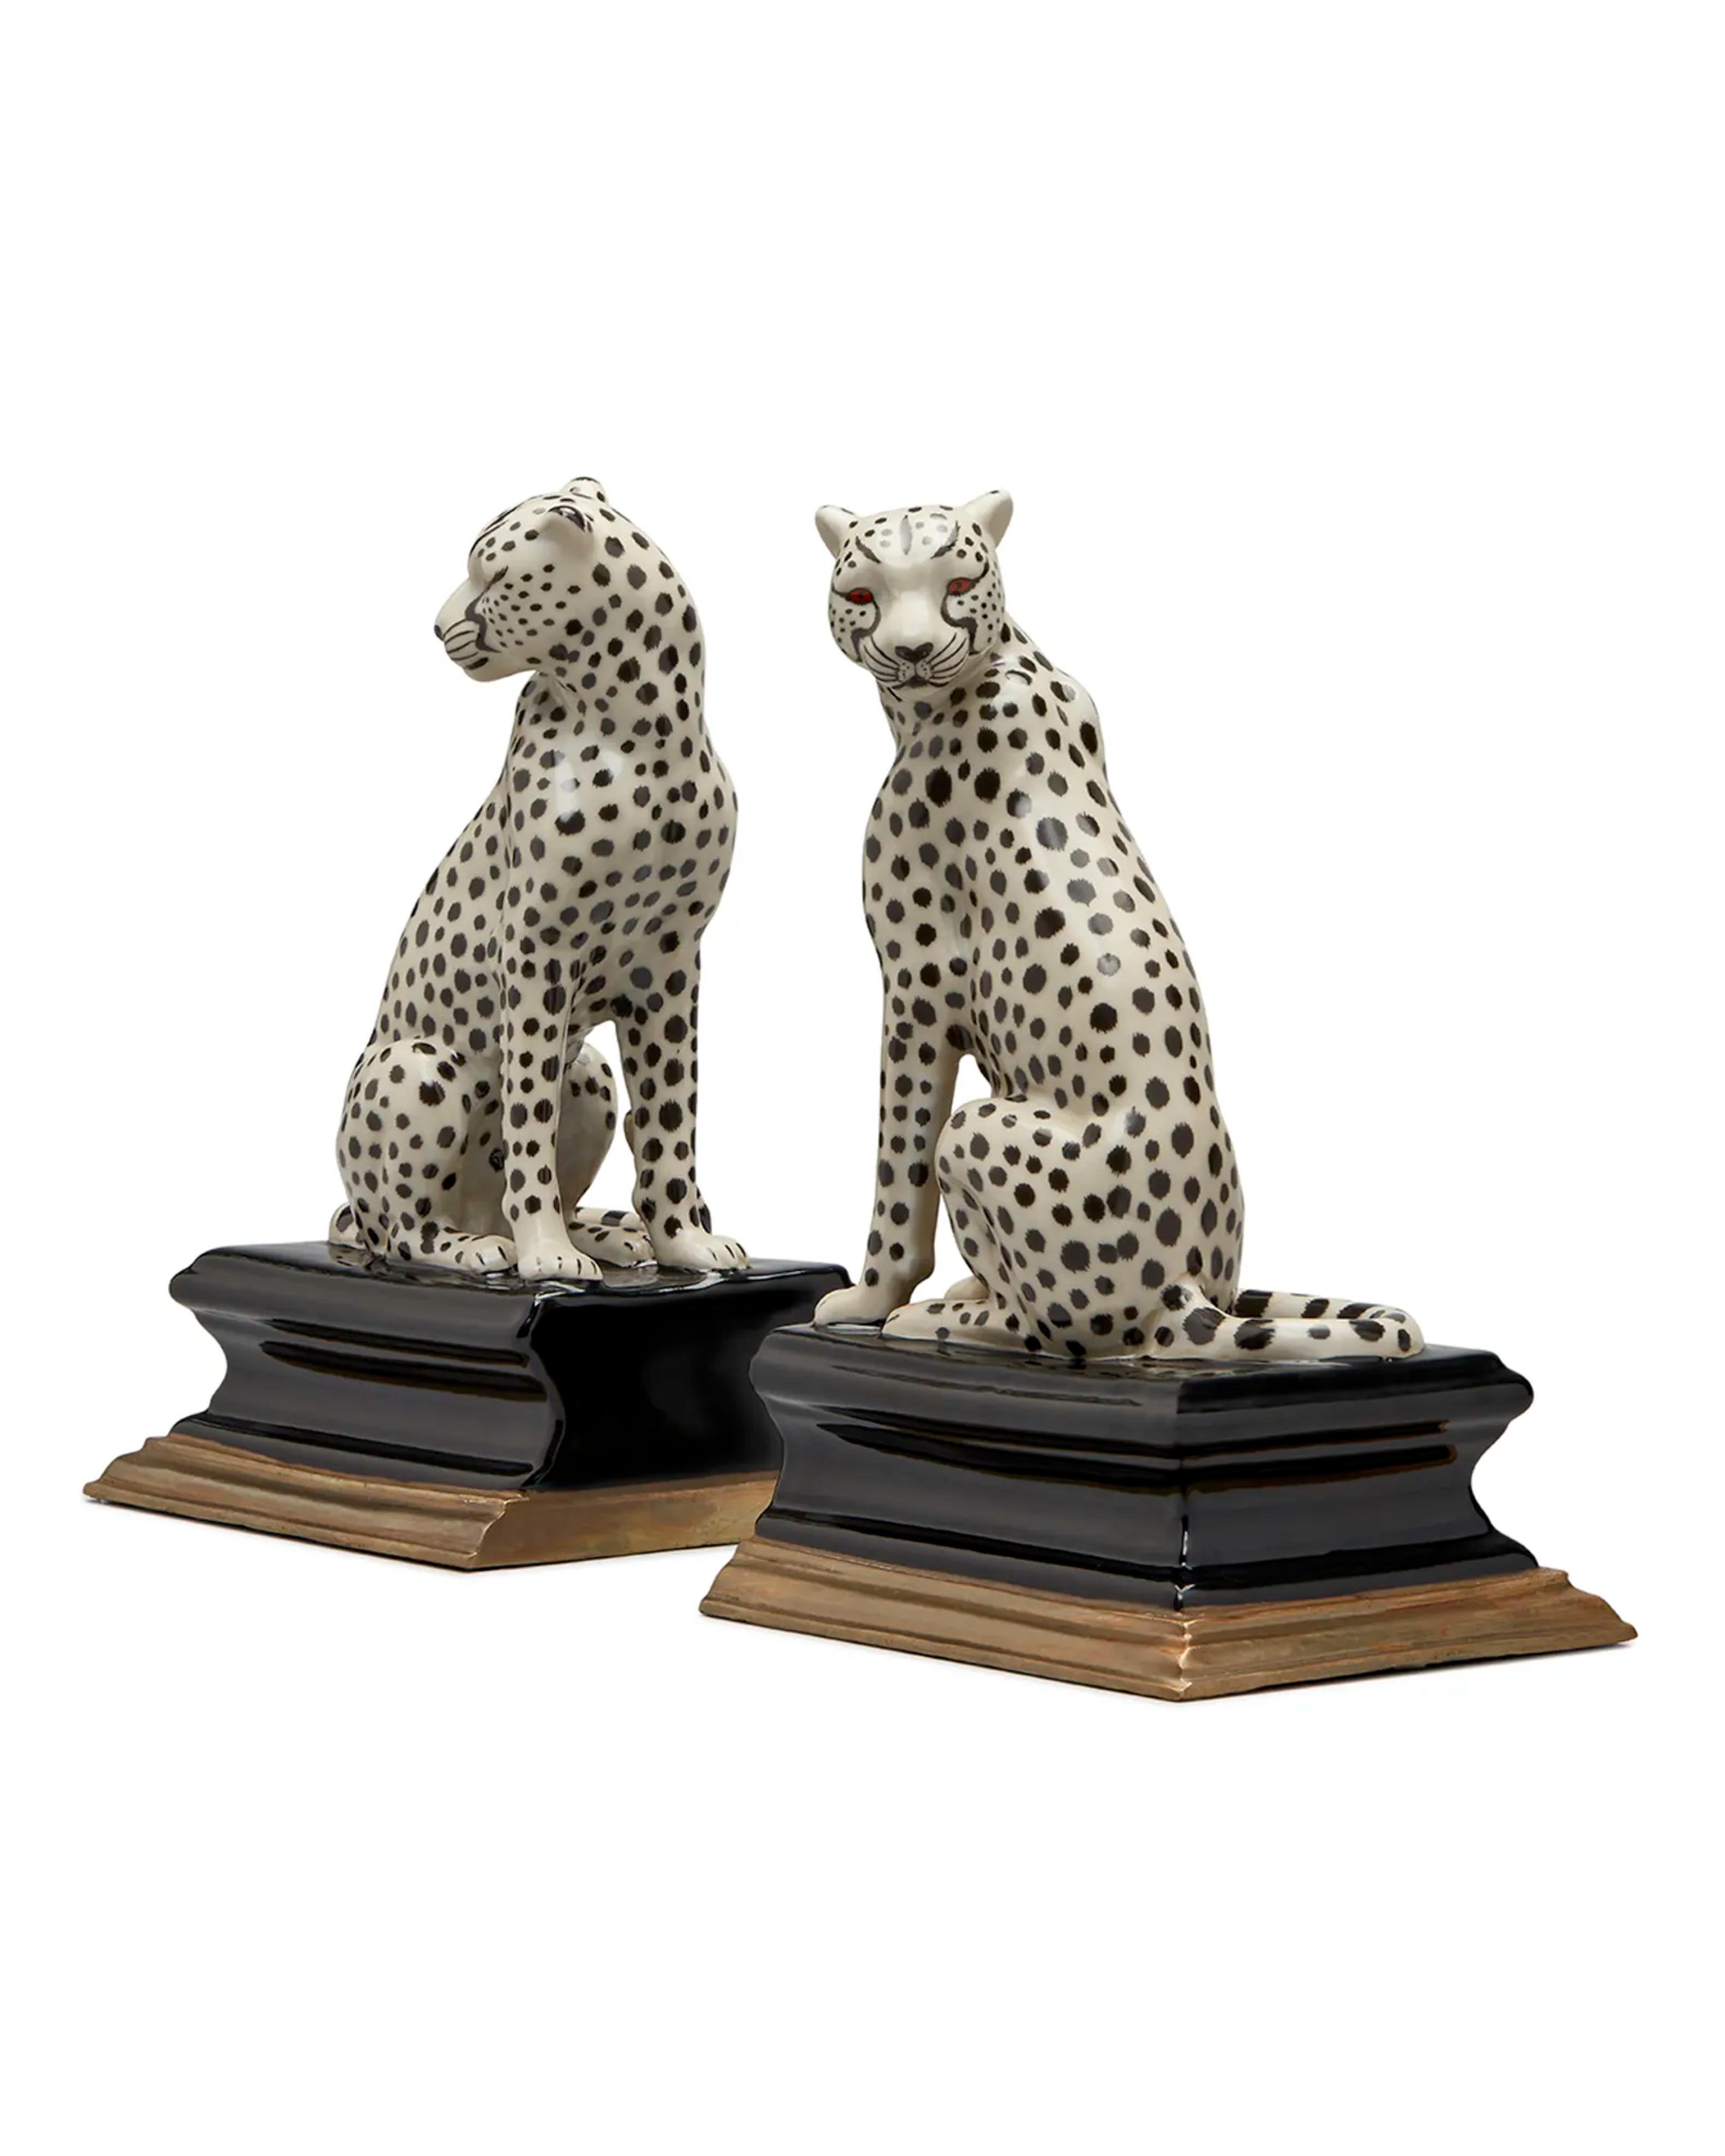 House of Hackney - House of Hackney Cheetah Bookends